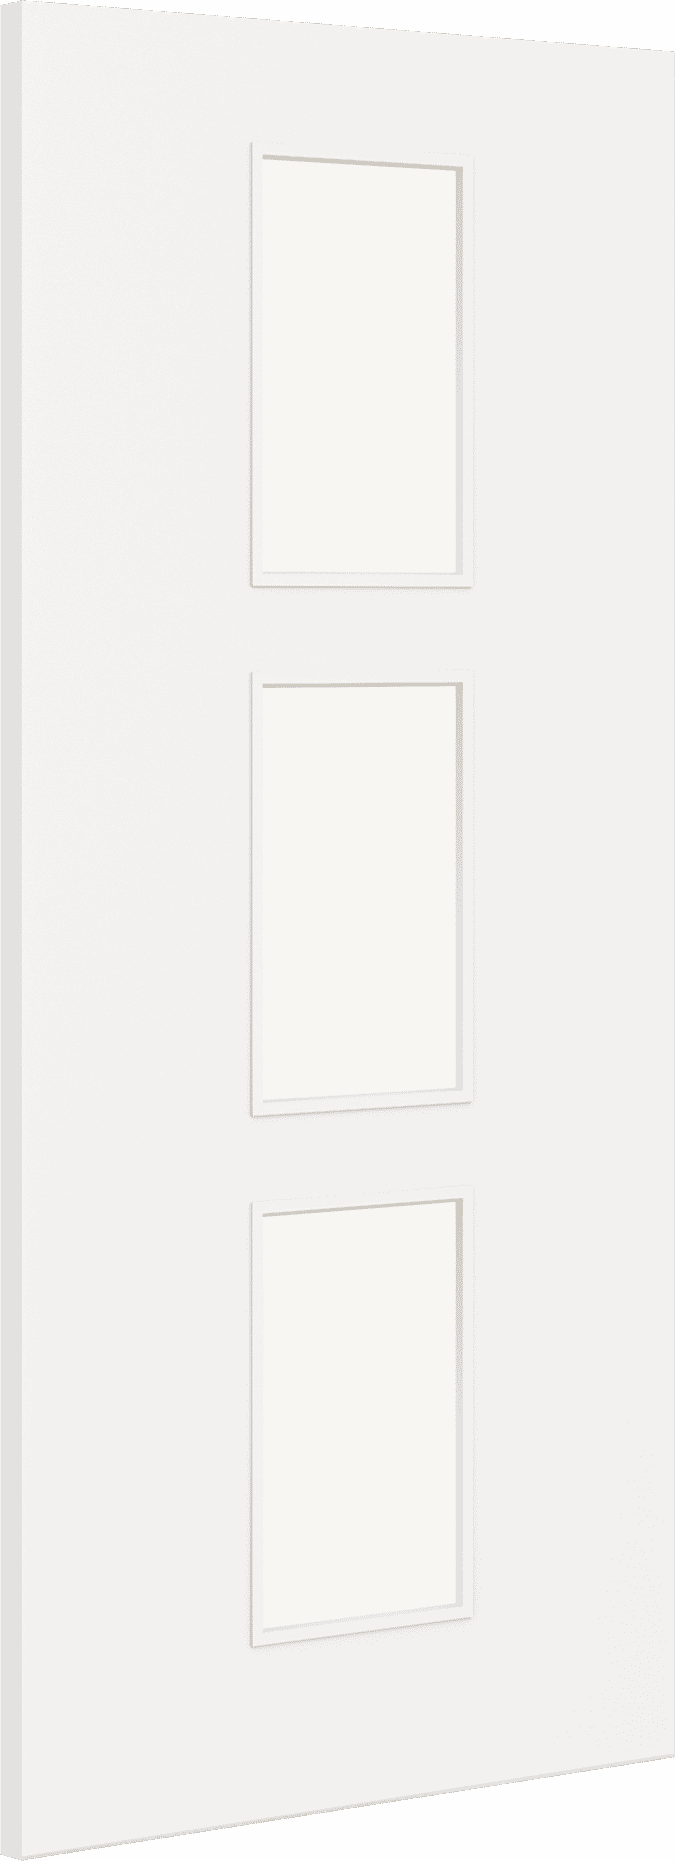 1981mm x 914mm x 44mm (36") Architectural Paint Grade White 11 Frosted Glazed Fire Door Blank